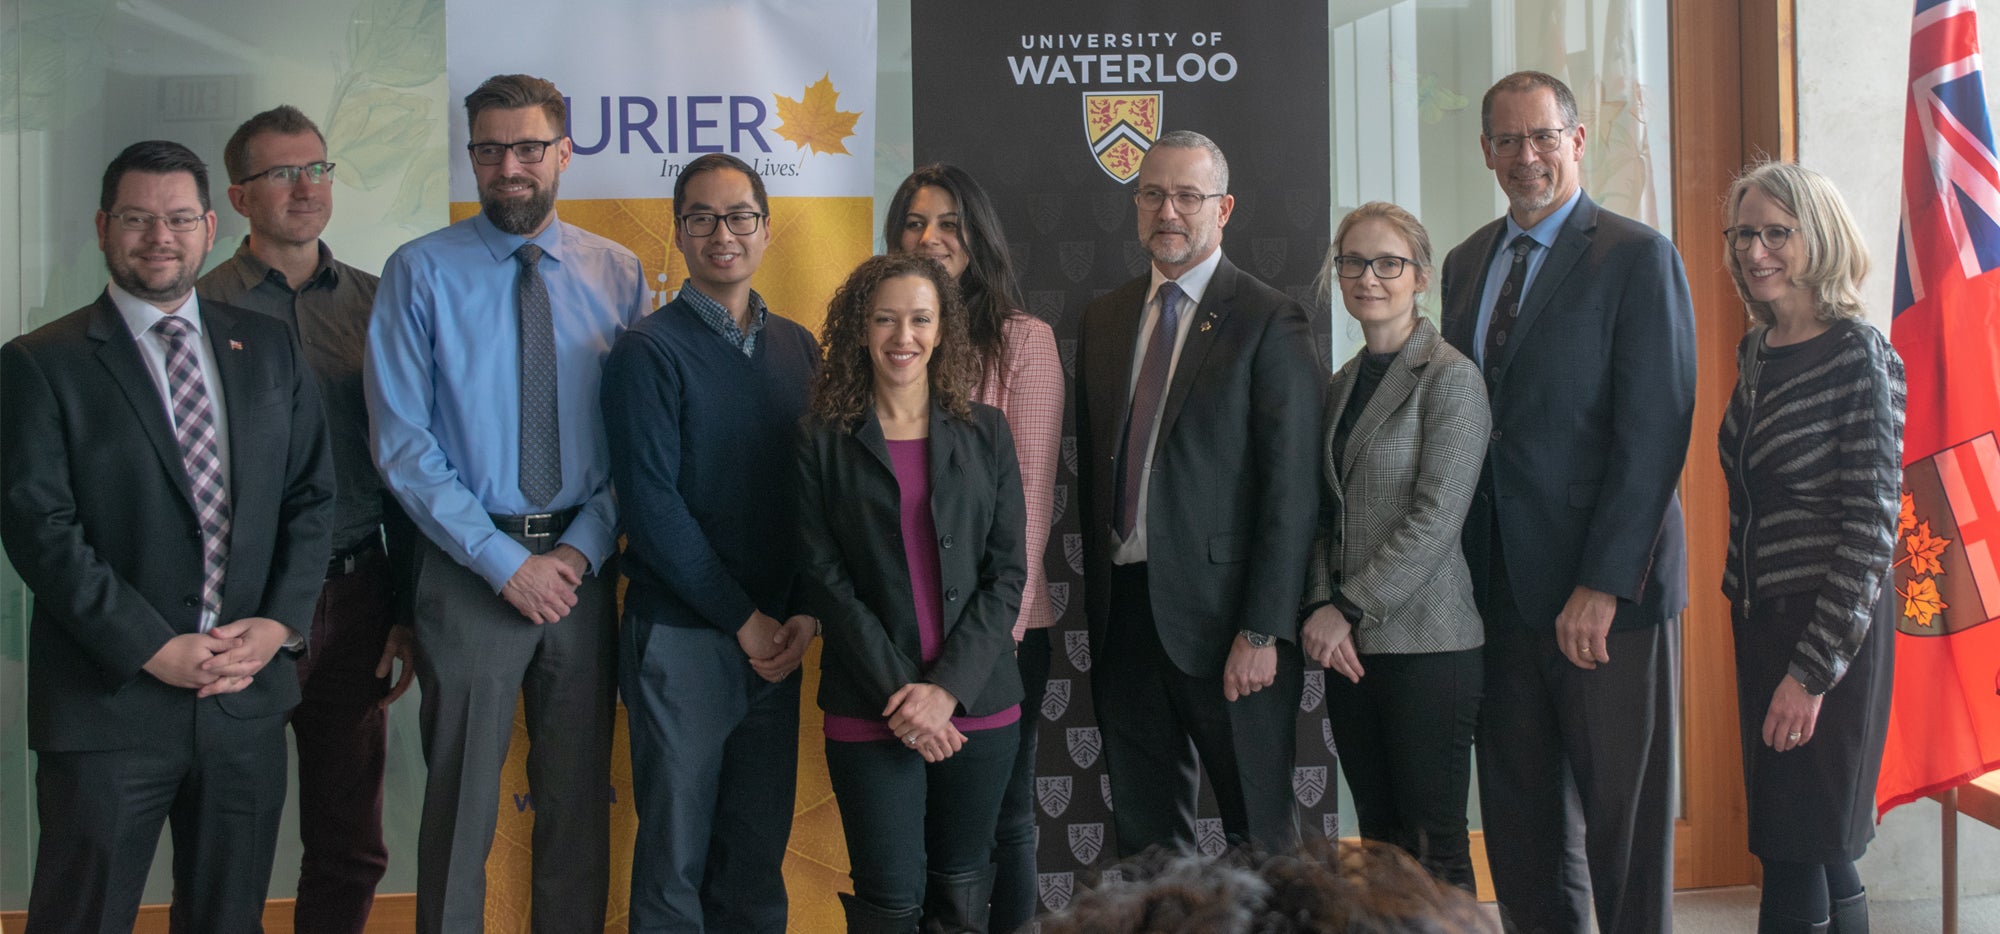 Representatives from the University of Waterloo, Laurier University and the Ontario Government standing and smiling